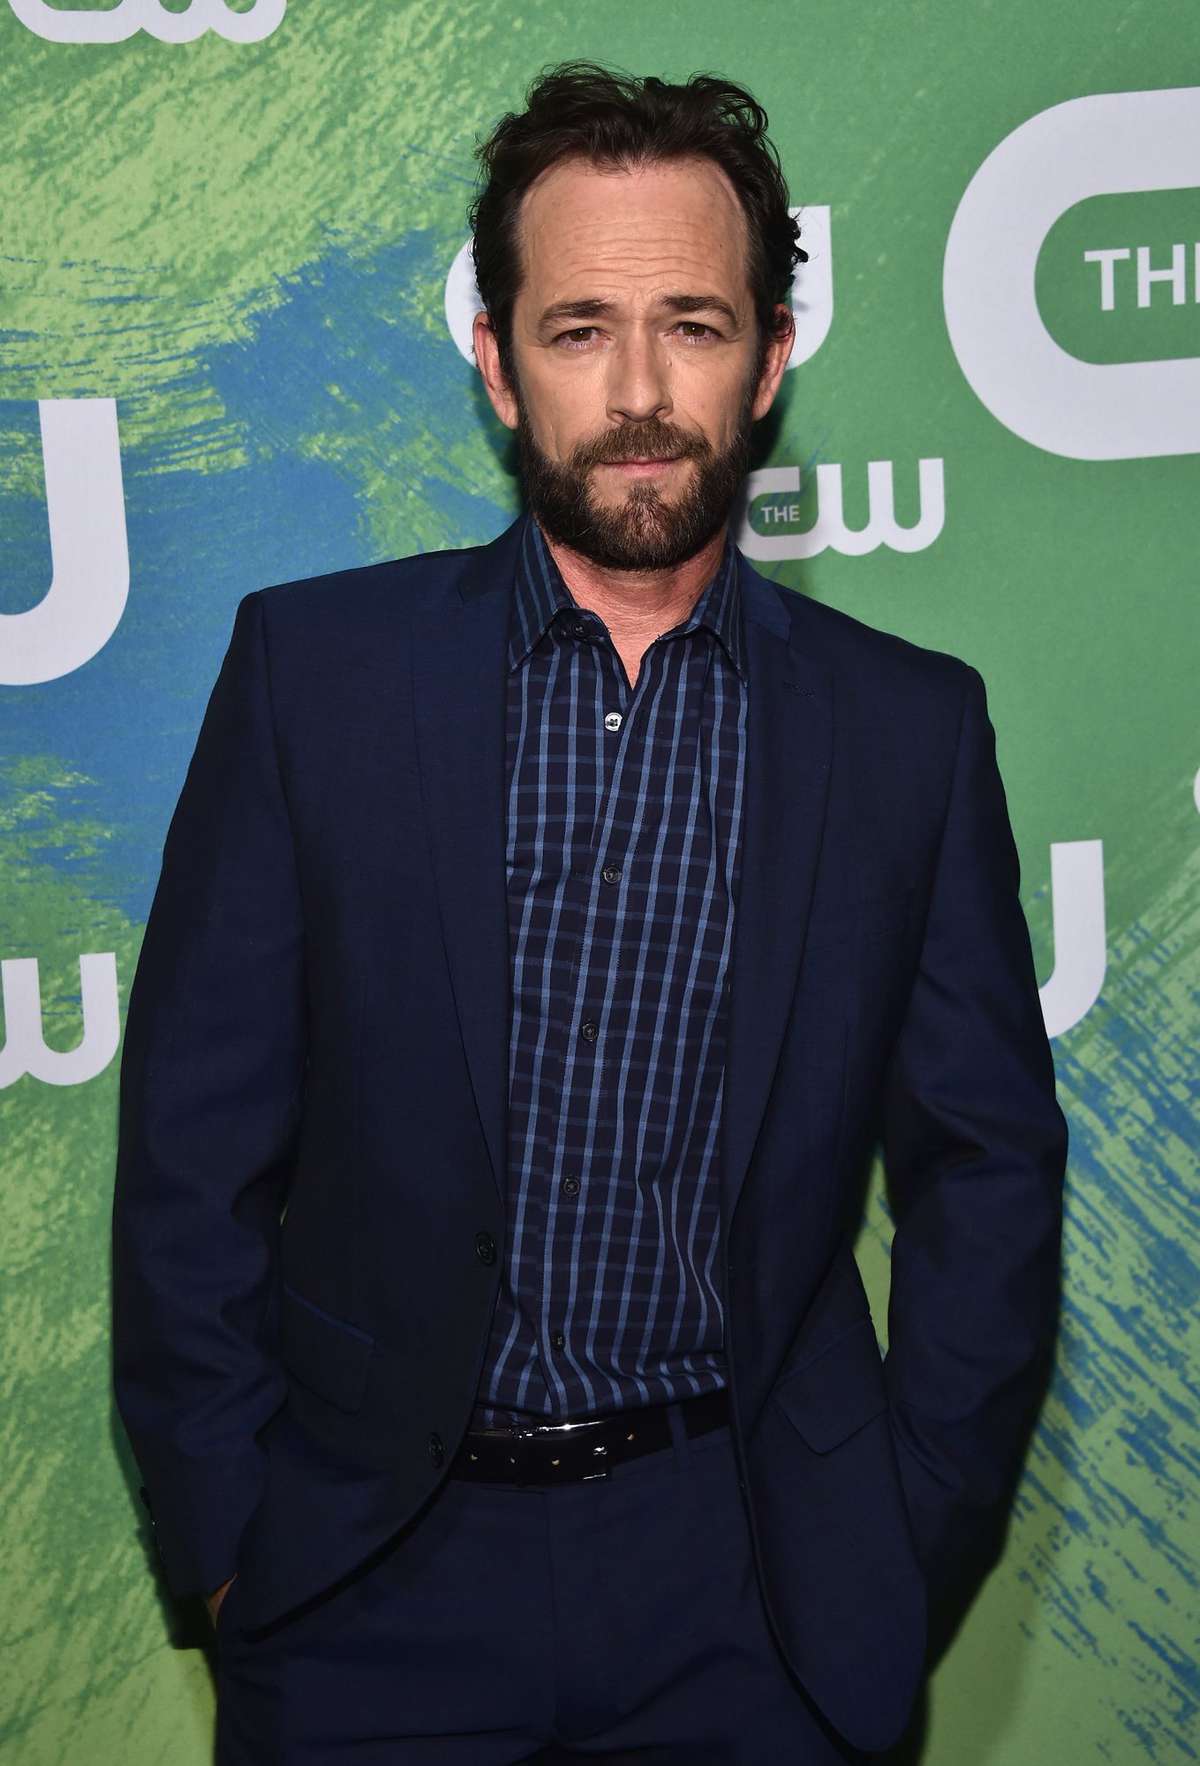 Luke Perry's Death Has People Wondering: What Causes a Massive Stroke at a Young Age, Anyway?